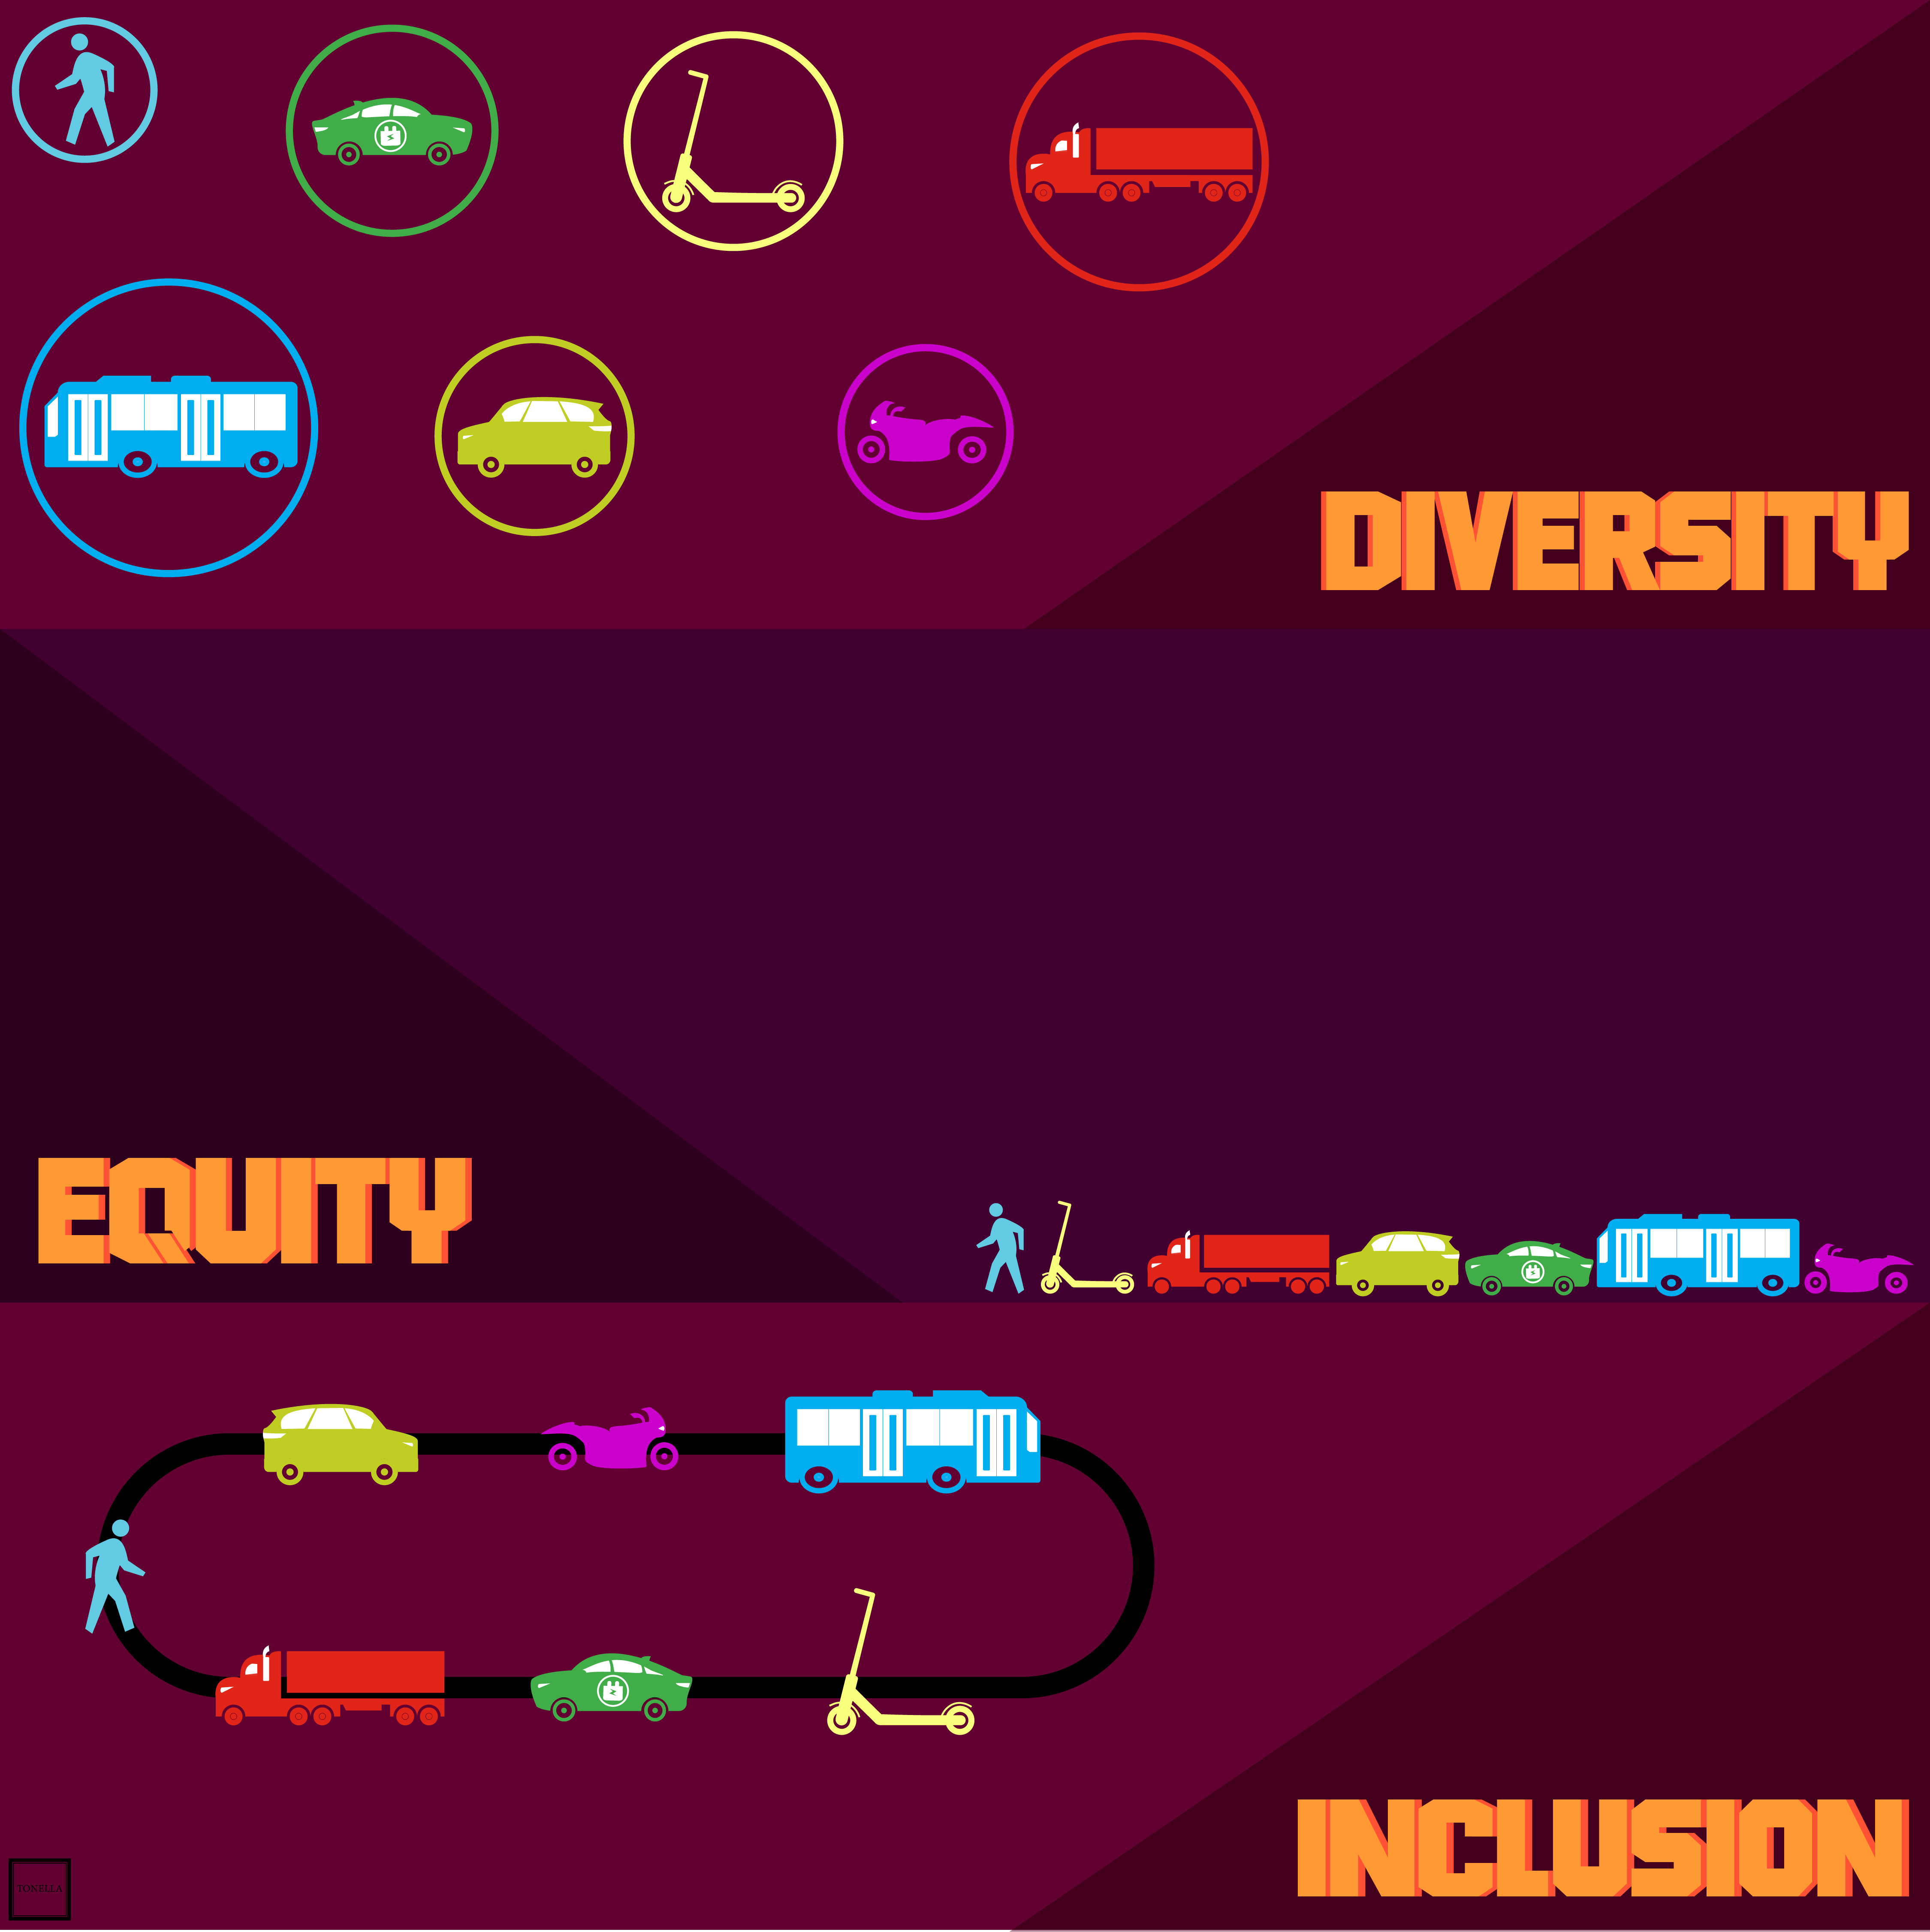 Diversity, Equity, & Inclusion graphic